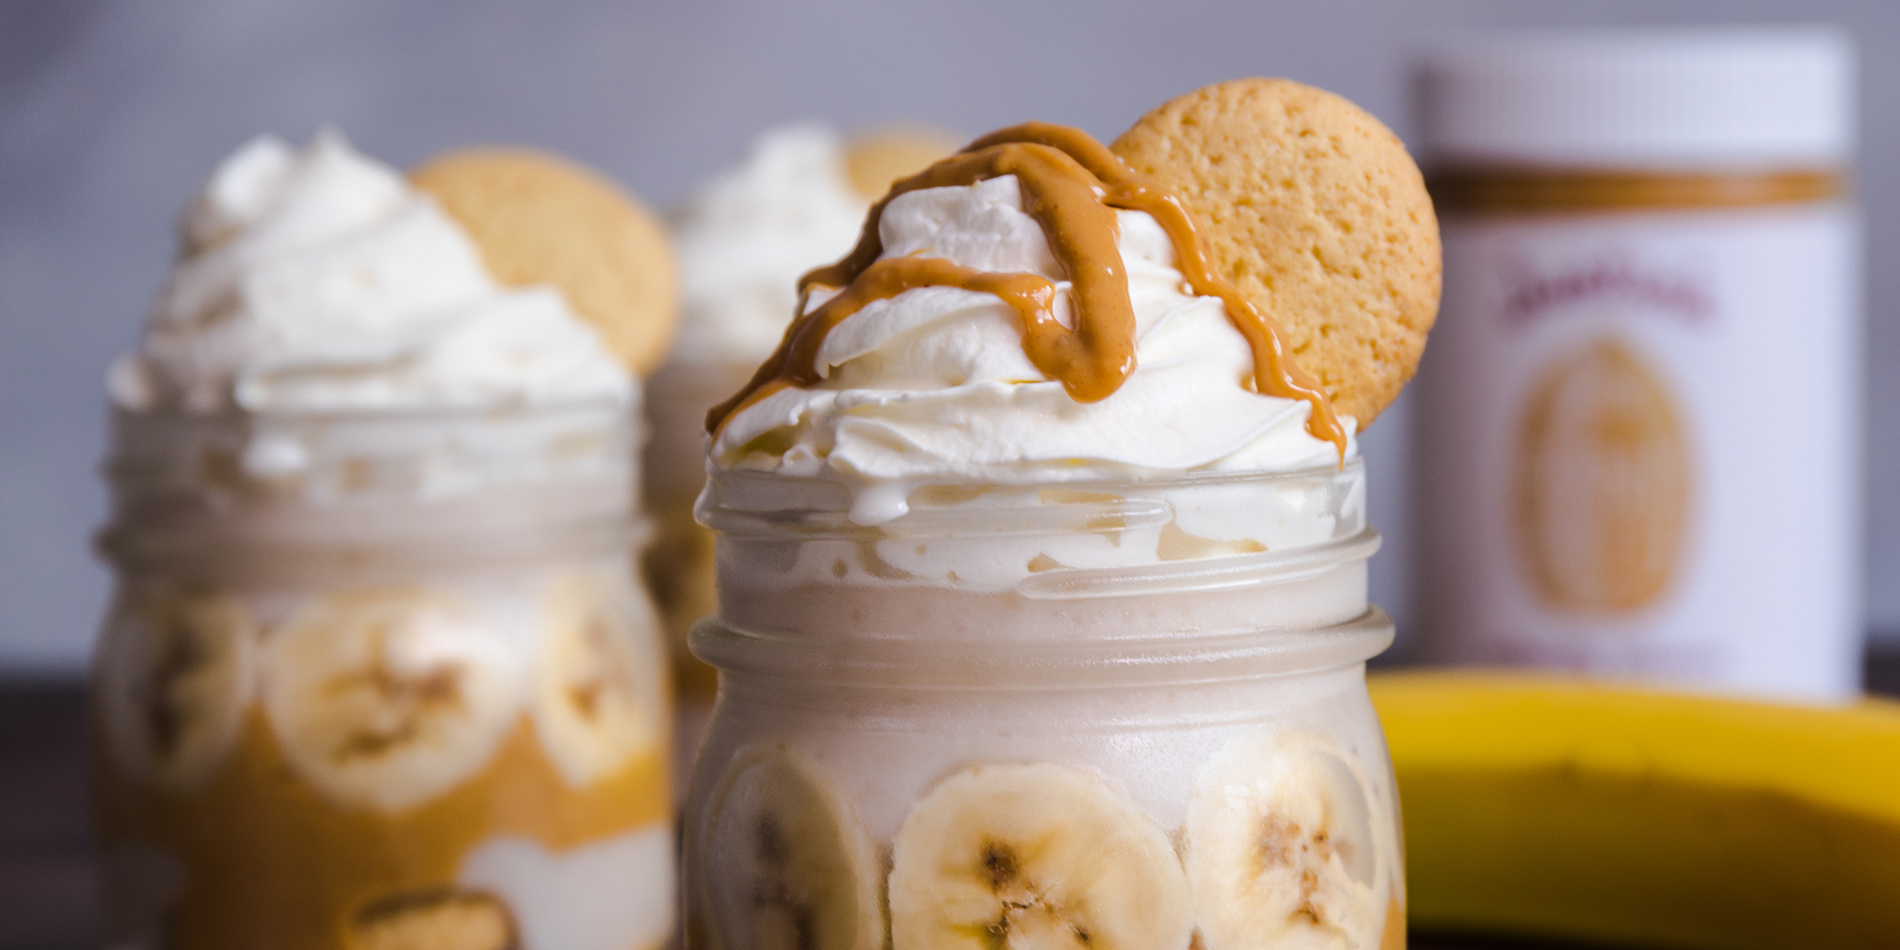 Peanut Butter Banana Pudding with whipped cream and peanut butter drizzle with cookies on a wooden top with white background